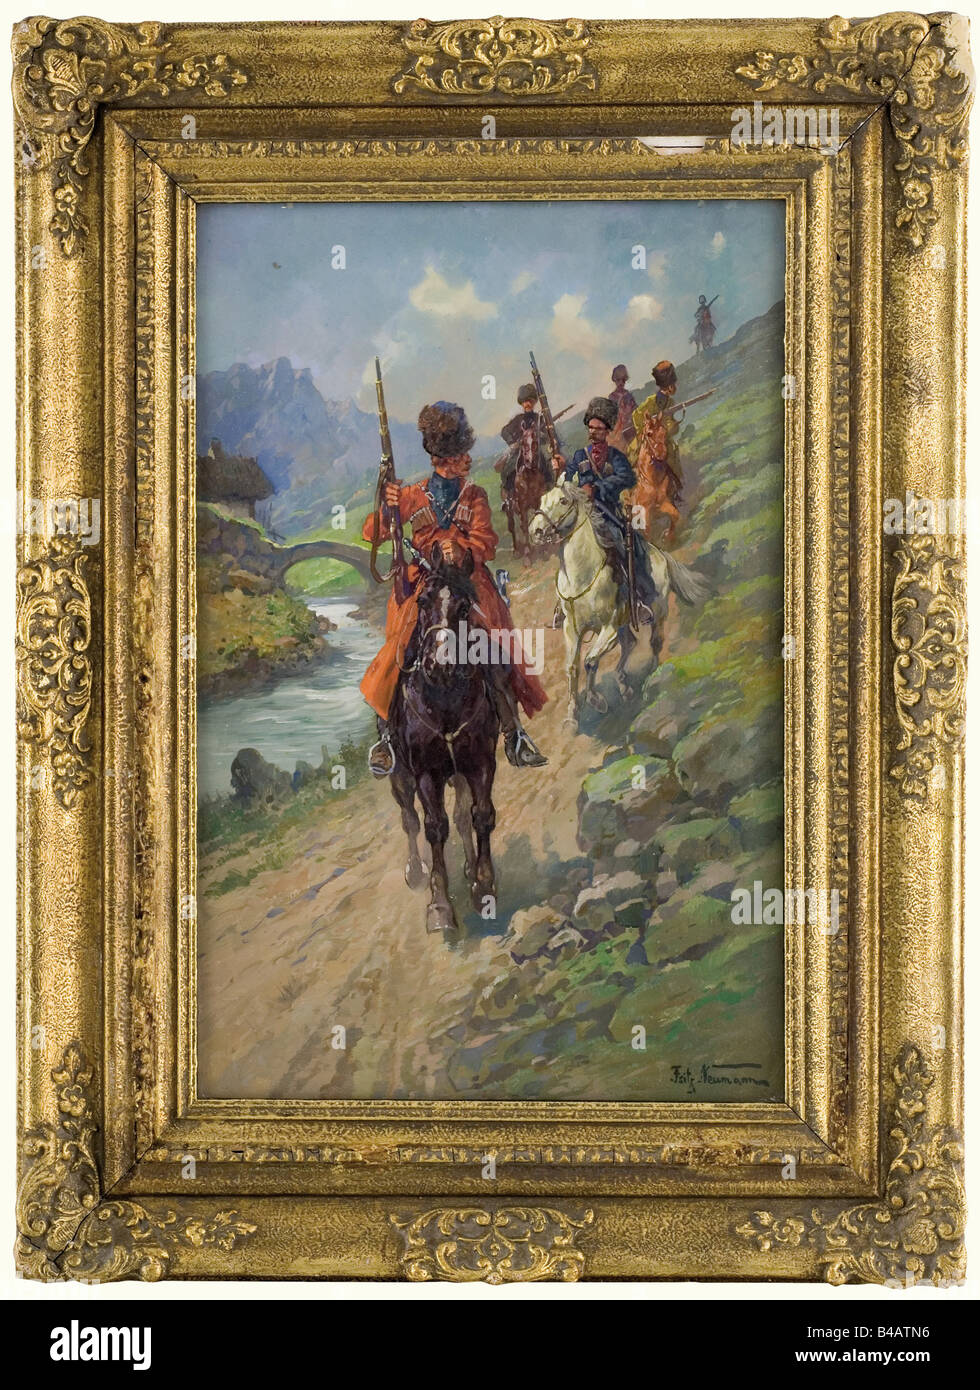 Fritz Neumann (1881 - ?) - 'Cossack Patrol', a scene of a group of horsemen at a mountain stream with bridge (Caucasus). Oil on cardboard (wood?), signed on the lower right 'Fritz Neumann', size of painting: 38 x 59 cm. Slightly damaged gilt stucco frame. fine arts, people, 19th century, object, objects, stills, clipping, clippings, cut out, cut-out, cut-outs, painting, paintings, fine arts, art, picture, pictures, illustrations, Artist's Copyright has not to be cleared Stock Photo